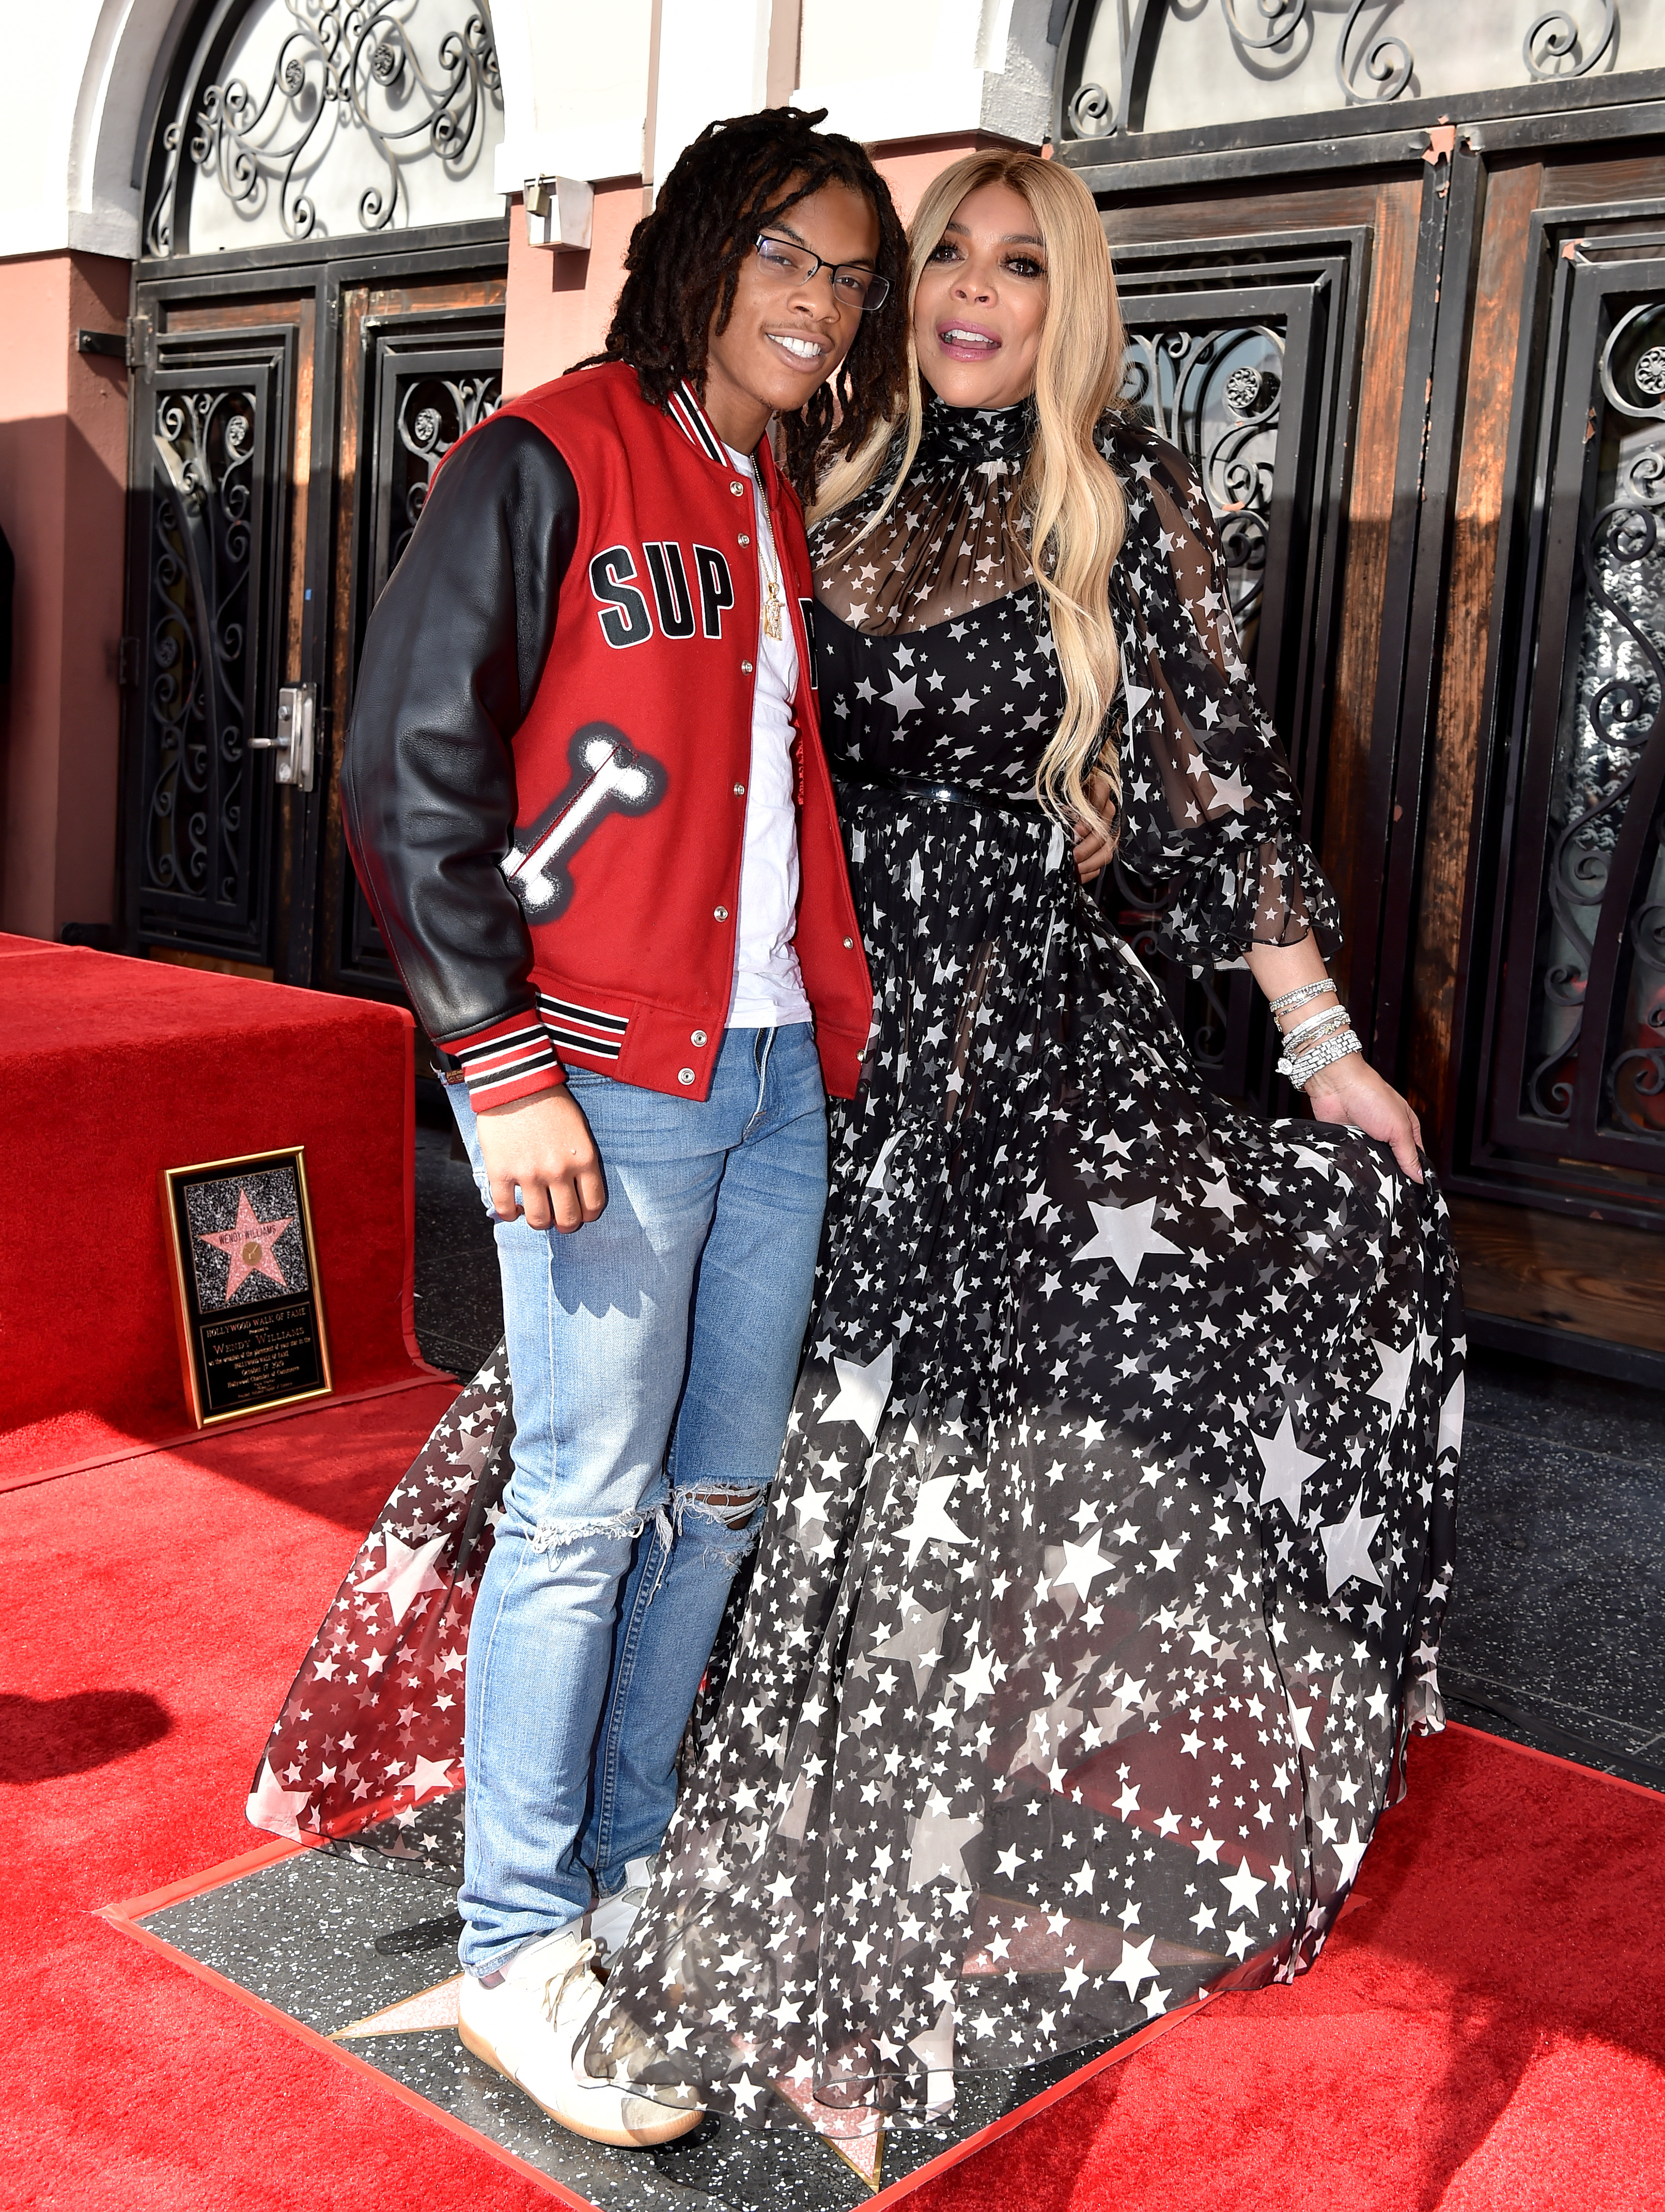 Kevin Hunter Jr. and Wendy Williams at her Hollywood Walk of Fame star ceremony in Hollywood, California on October 17, 2019 | Source: Getty Images